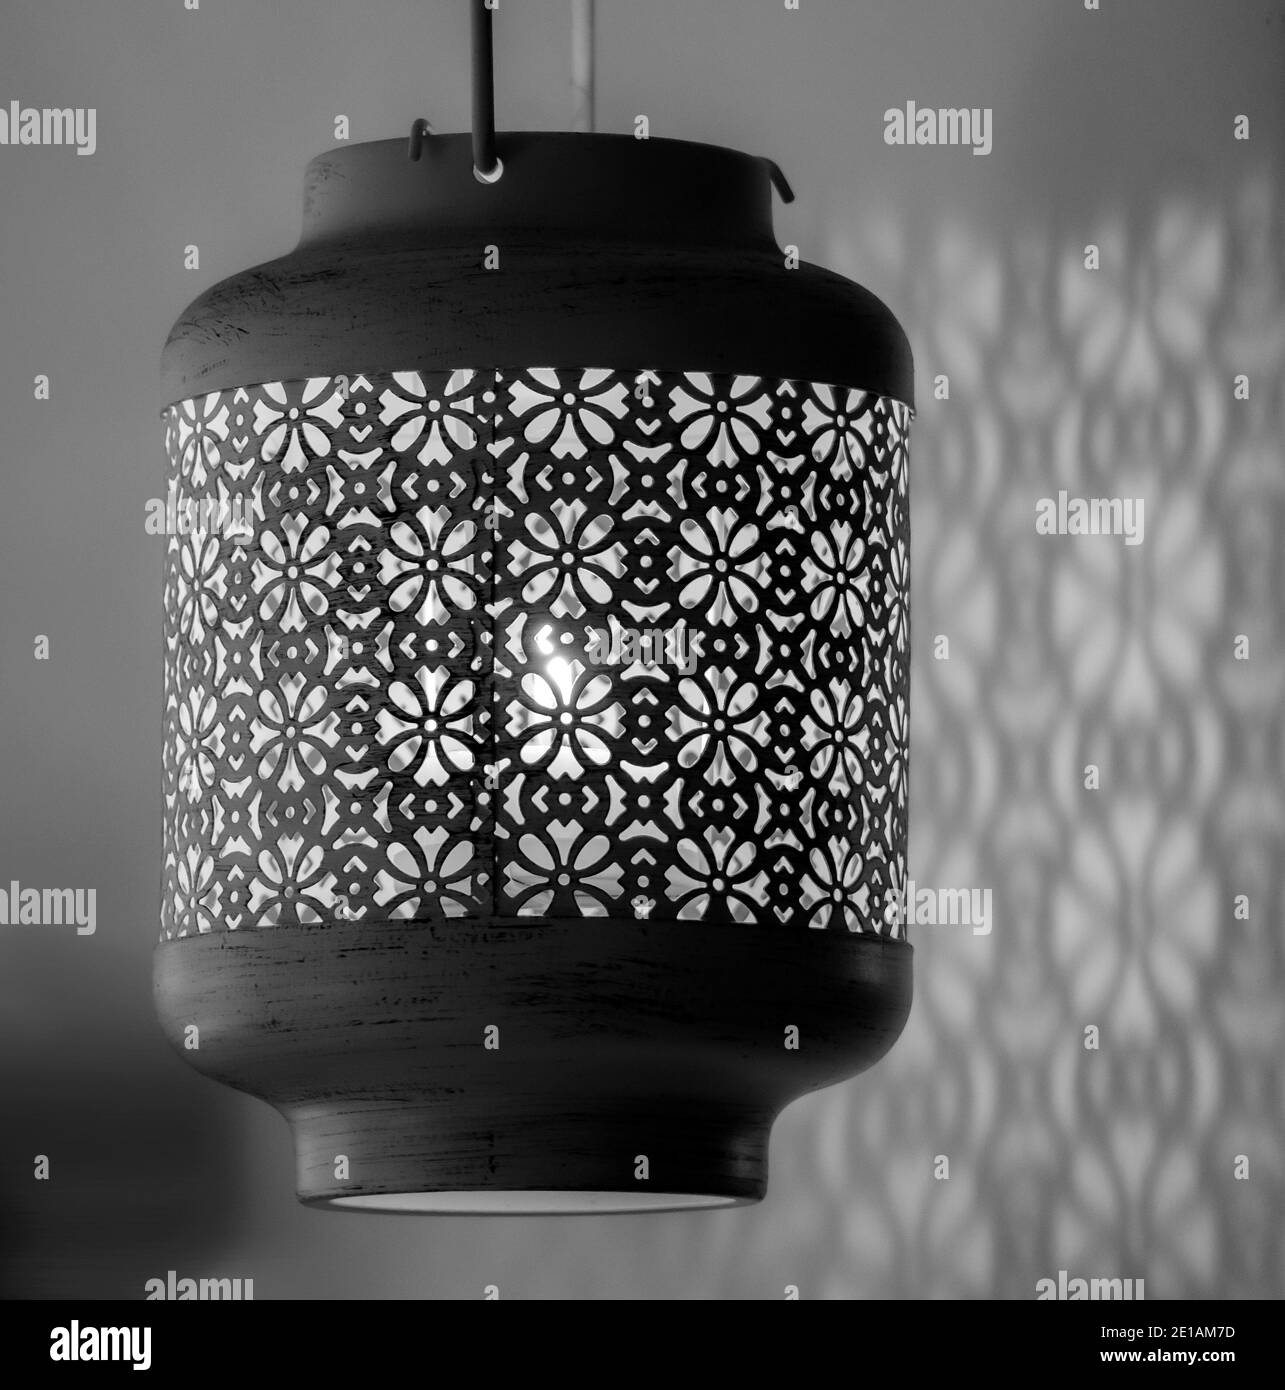 Candle light lamp with beautiful detailed antique patterns designs casting shadows over the near wall Stock Photo